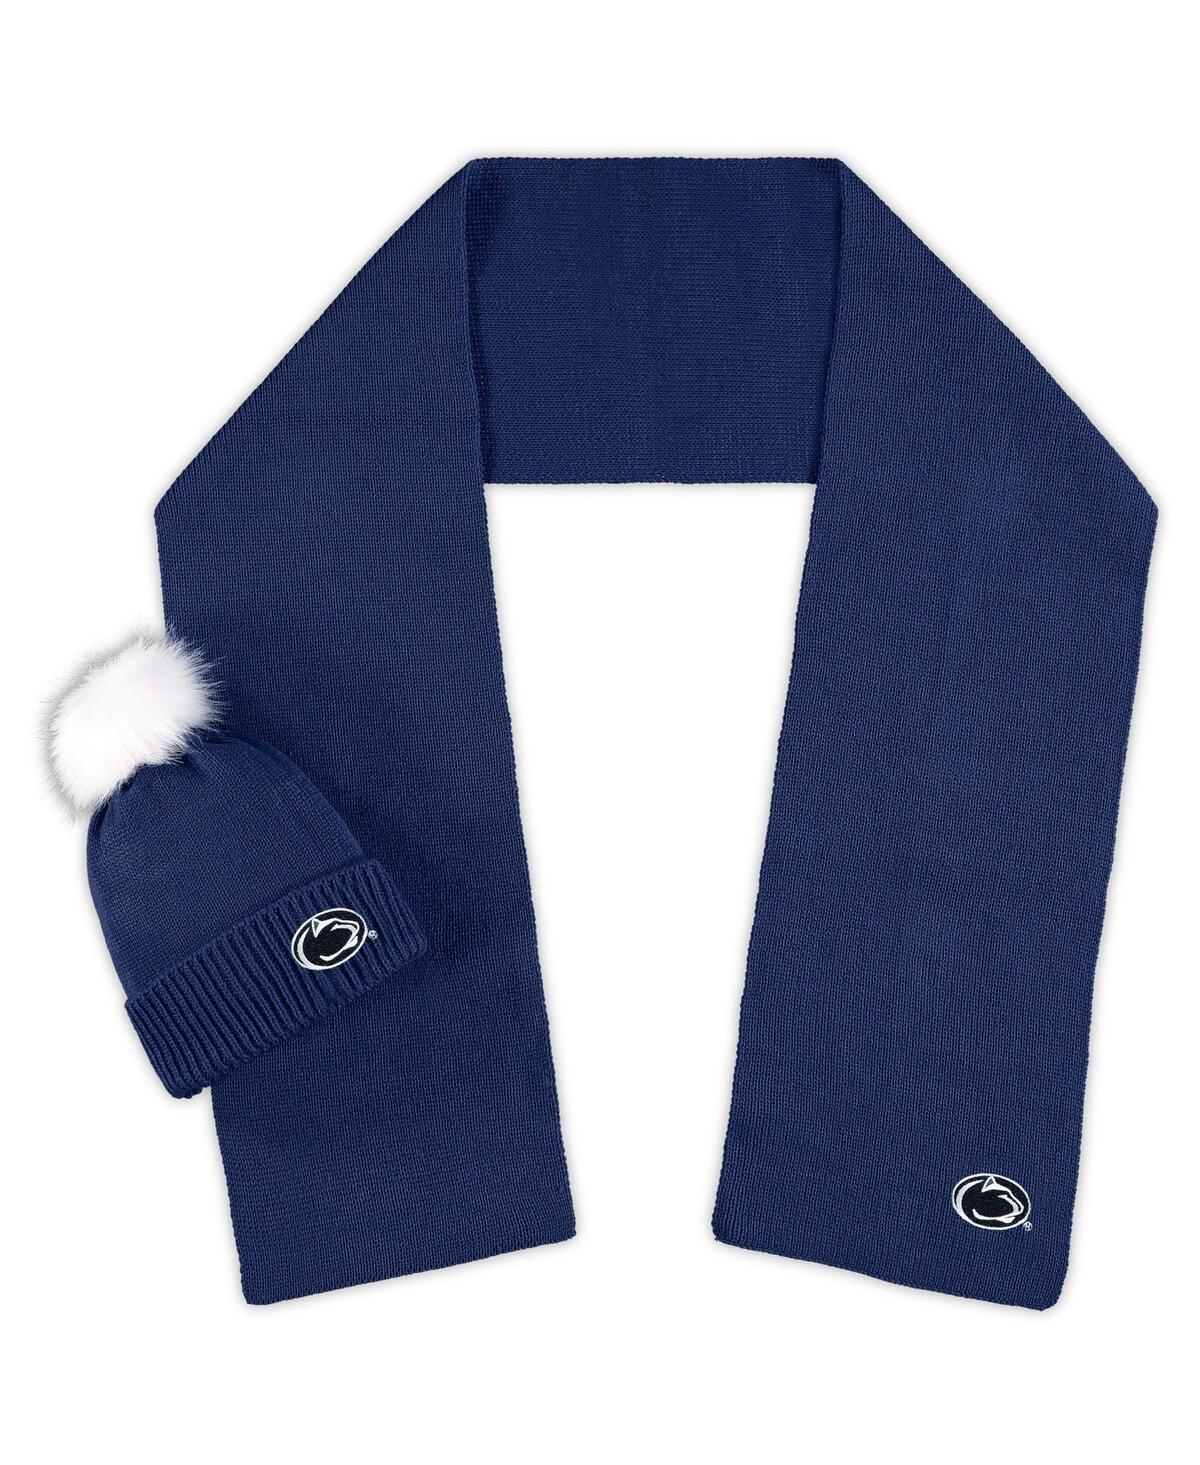 ZOOZATZ WOMEN'S PENN STATE NITTANY LIONS SCARF AND CUFFED KNIT HAT WITH POM SET